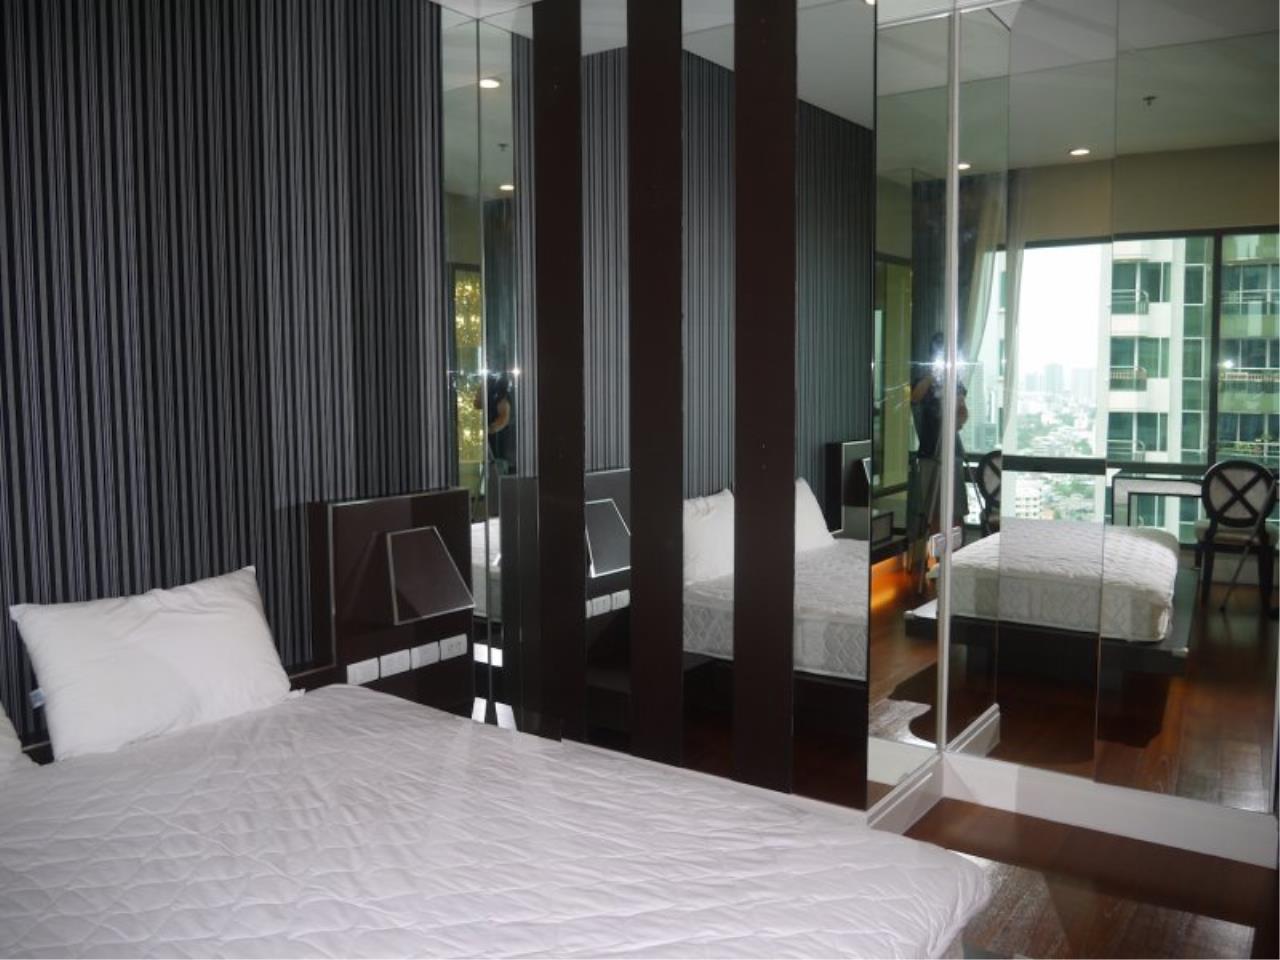 Piri Property Agency's Duplex 3 Bedrooms in the Bright Condo for rent on high floor 8